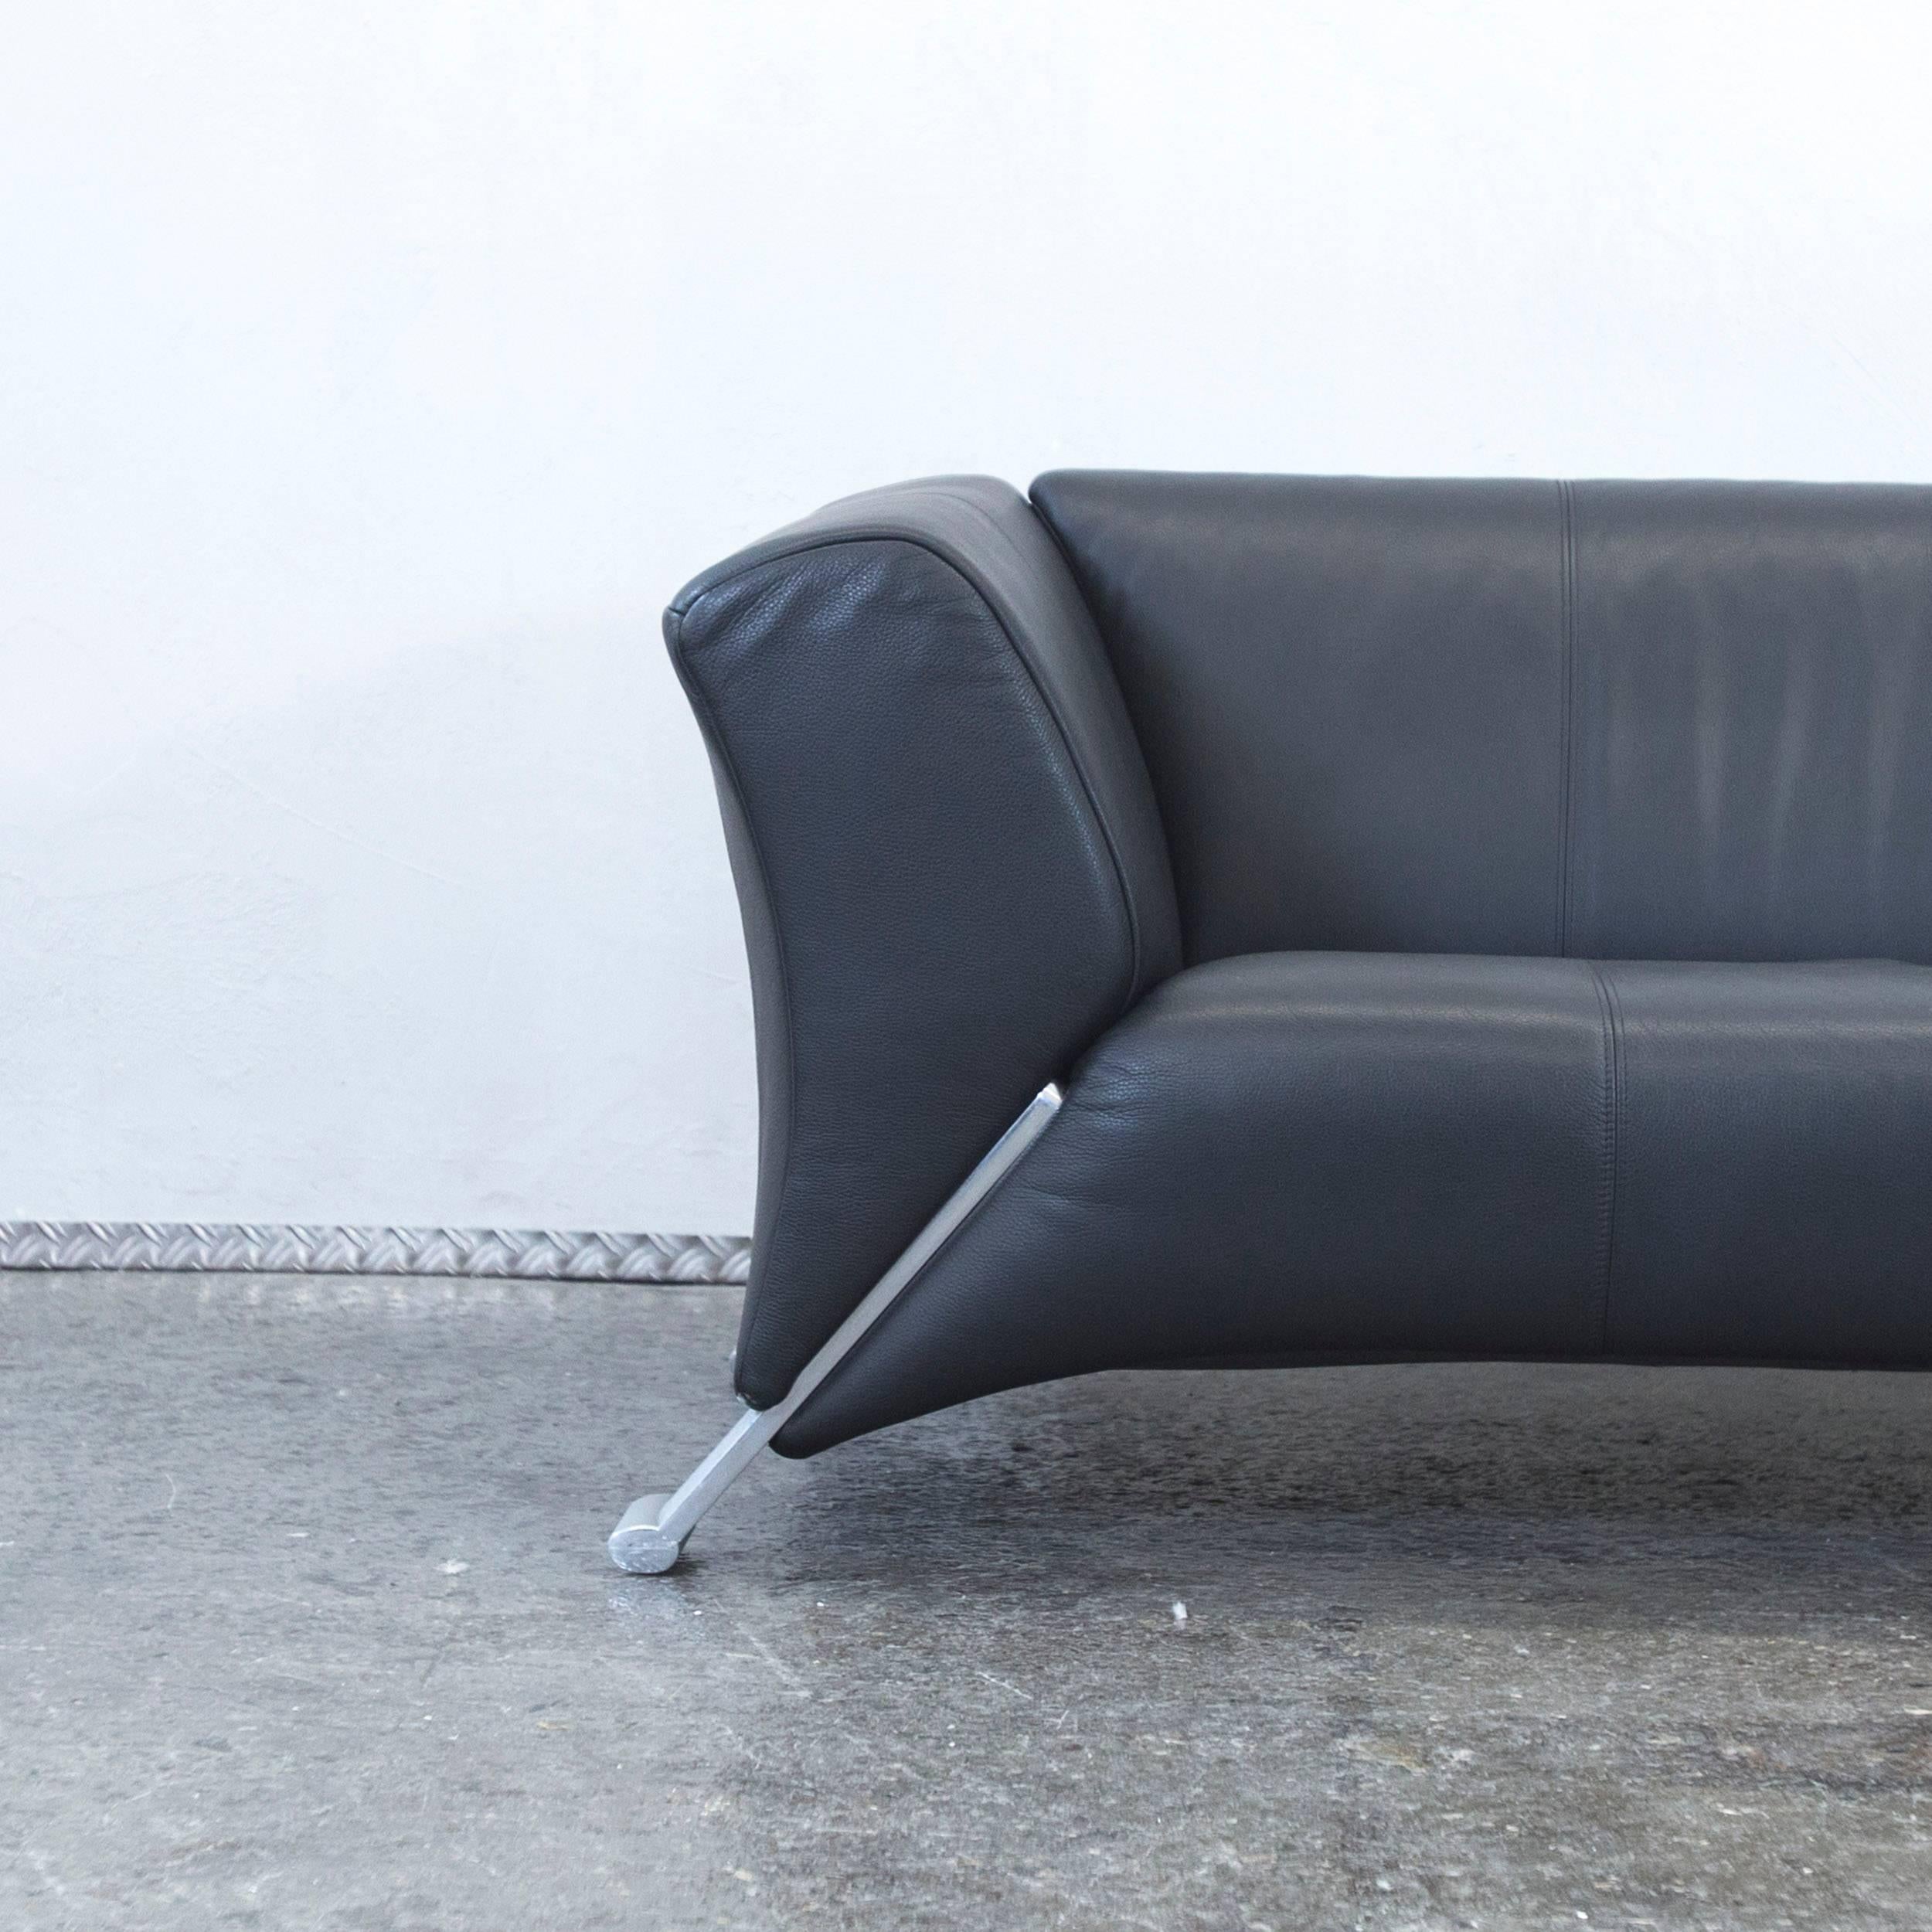 Black colored original Rolf Benz 322 designer leather sofa in a minimalistic and modern style.